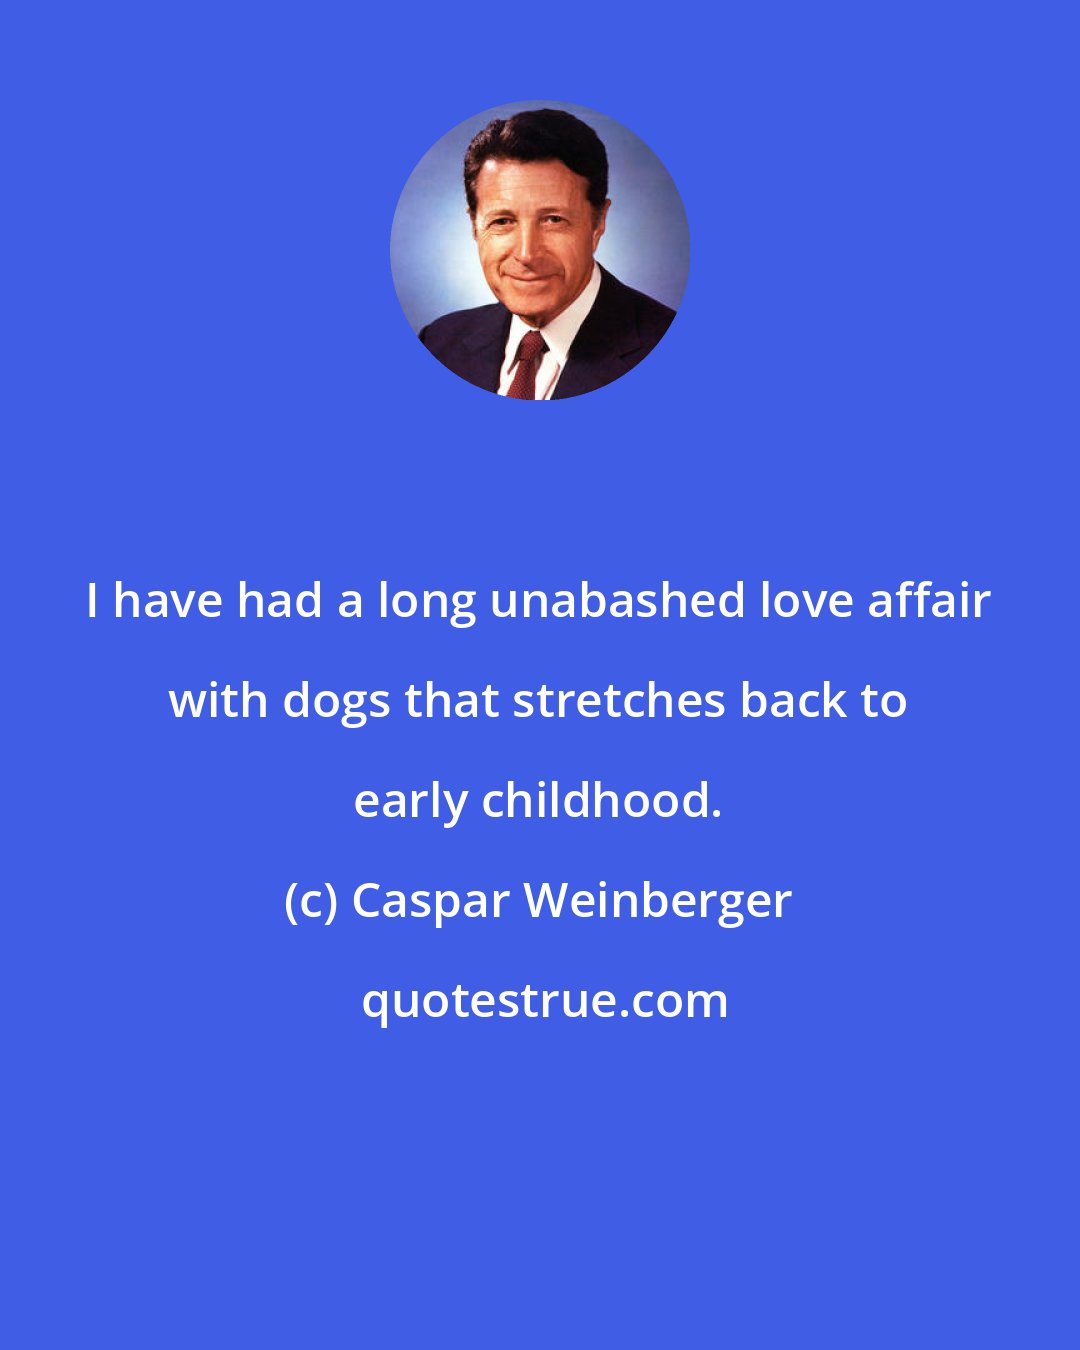 Caspar Weinberger: I have had a long unabashed love affair with dogs that stretches back to early childhood.